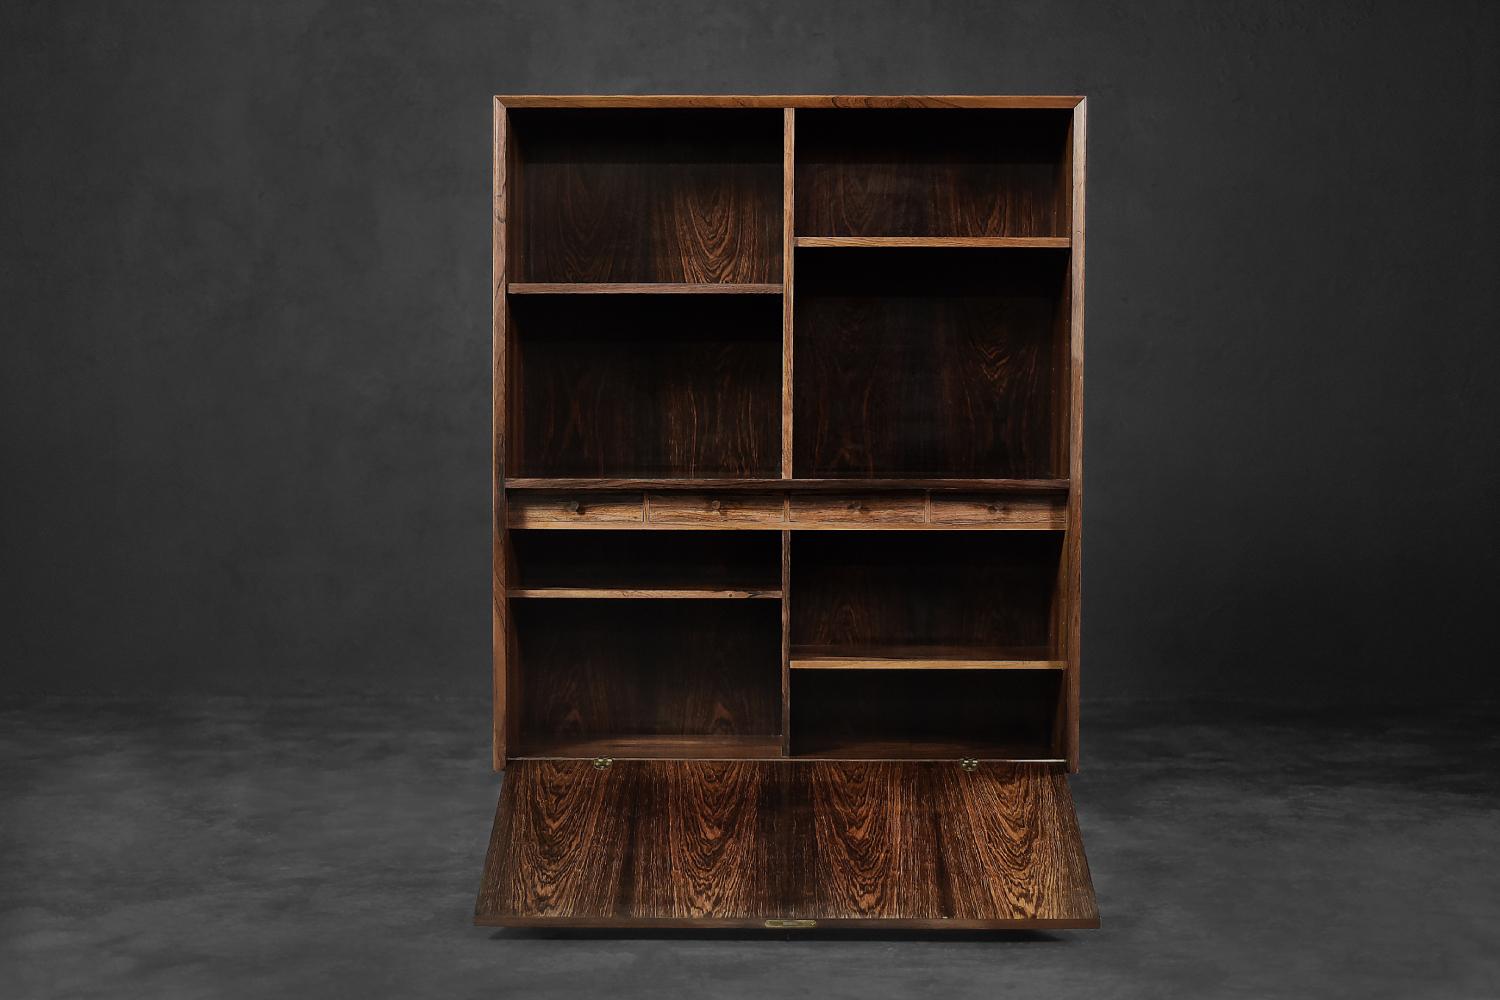 This cabinet was designed during the 1960s by Erik Brouer for the Danish manufacturer Brouer Møbelfabrik. It is made of rosewood with rich graining. The bookcase has four shelves whose height can be adjusted. Below it has a vertically closed bar